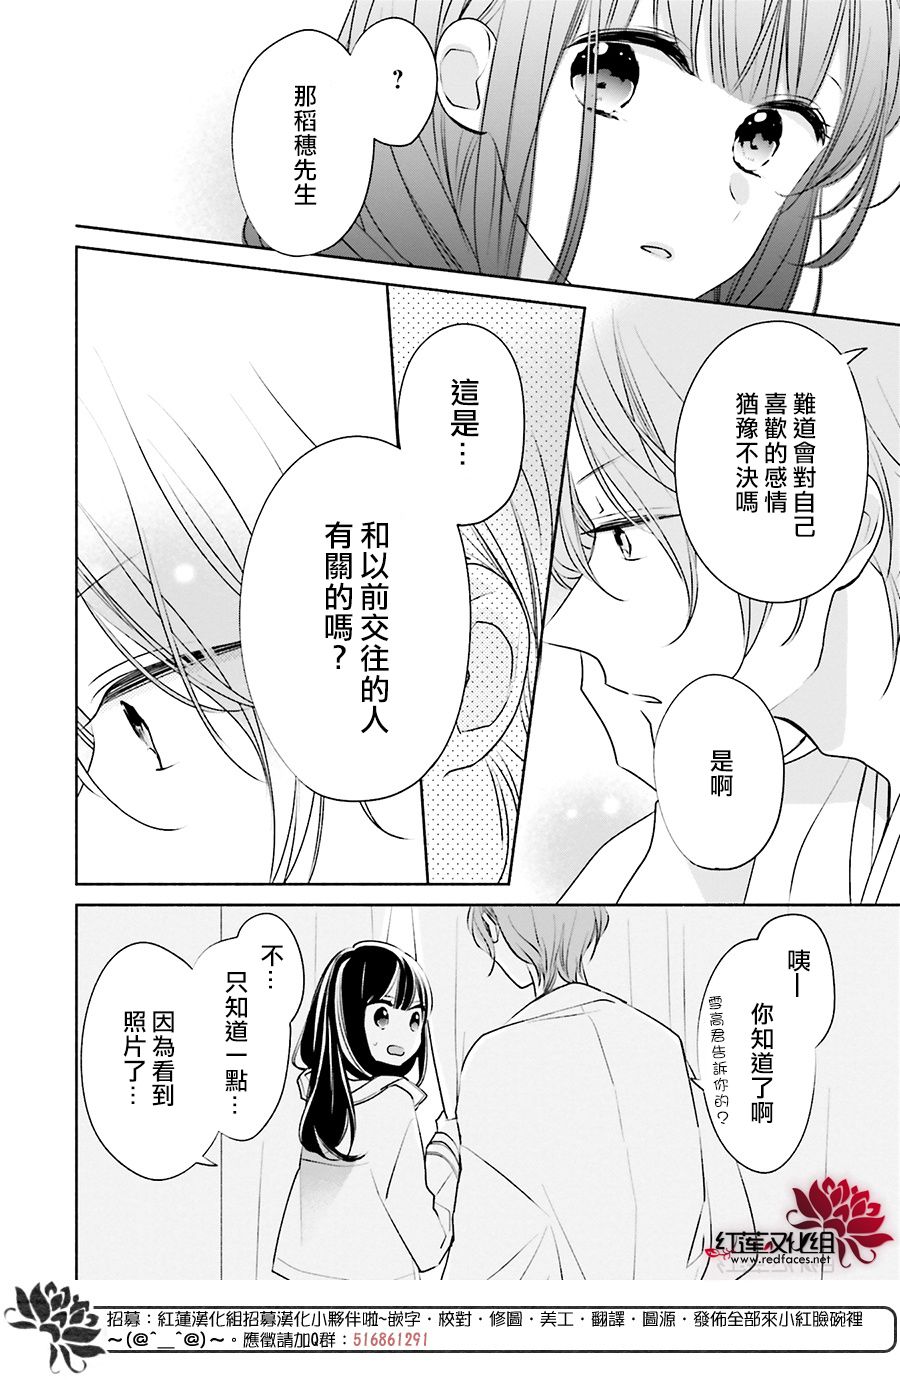 If given a second chance - 24話 - 6